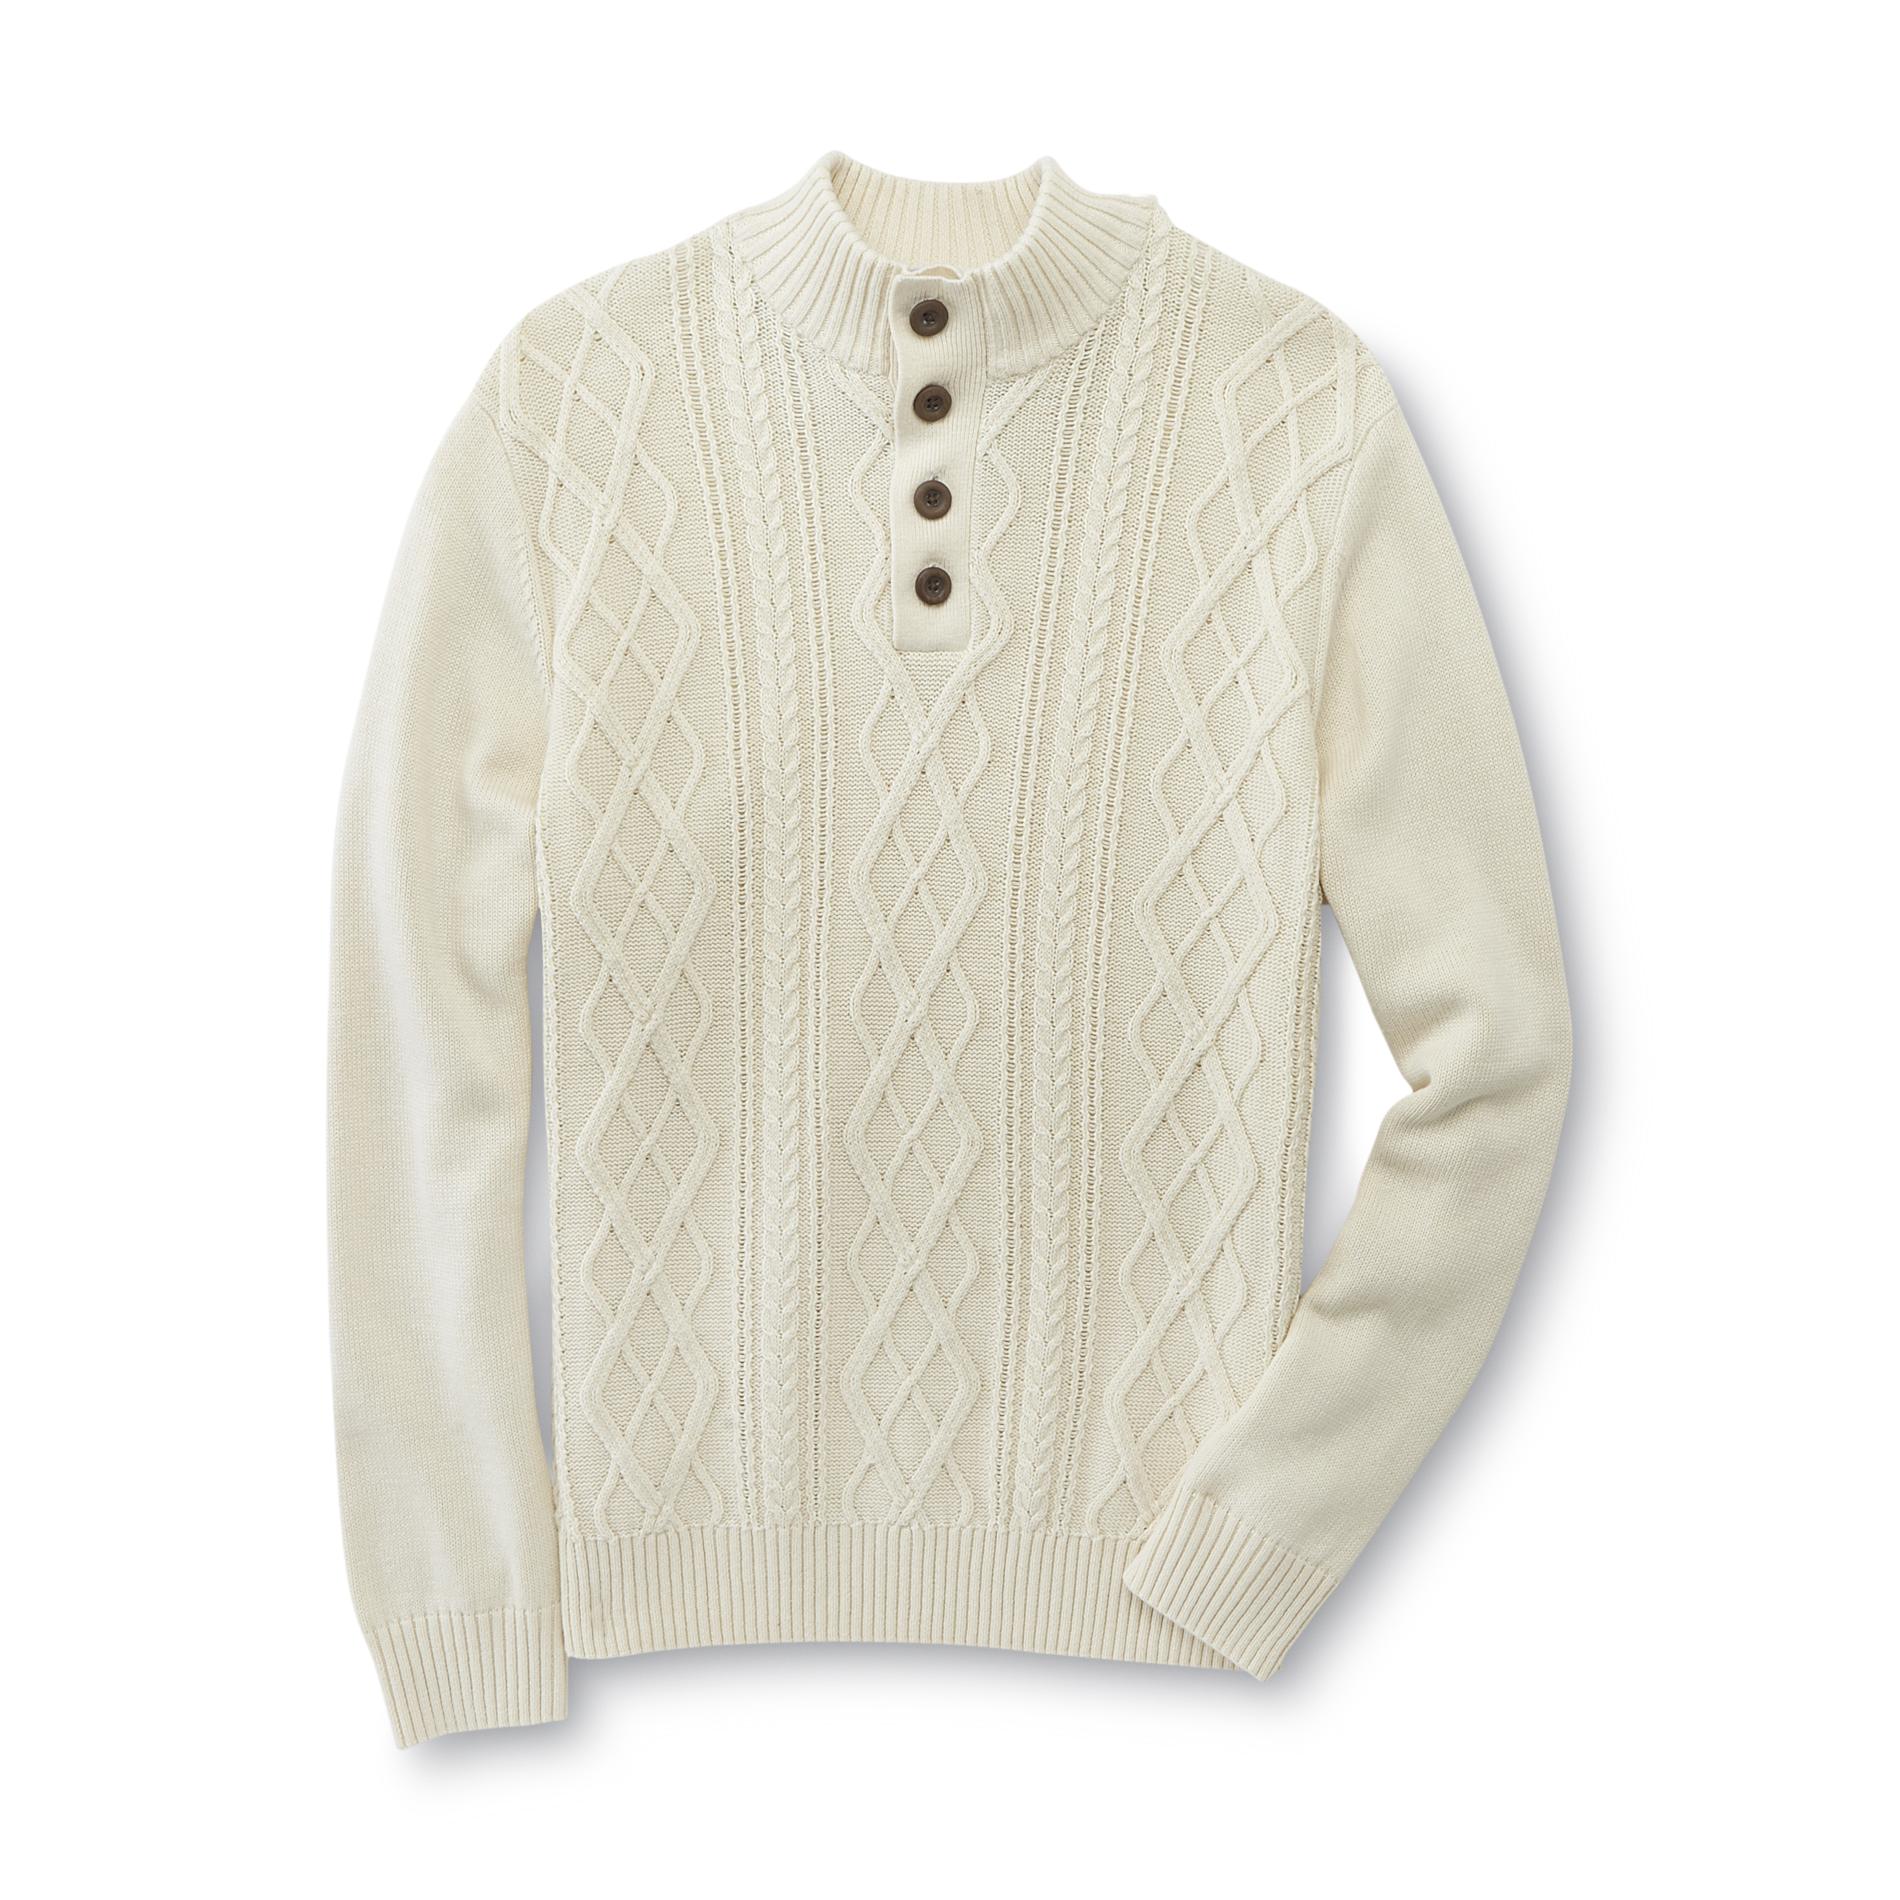 Northwest Territory Men's Mock Neck Sweater - Cable Knit